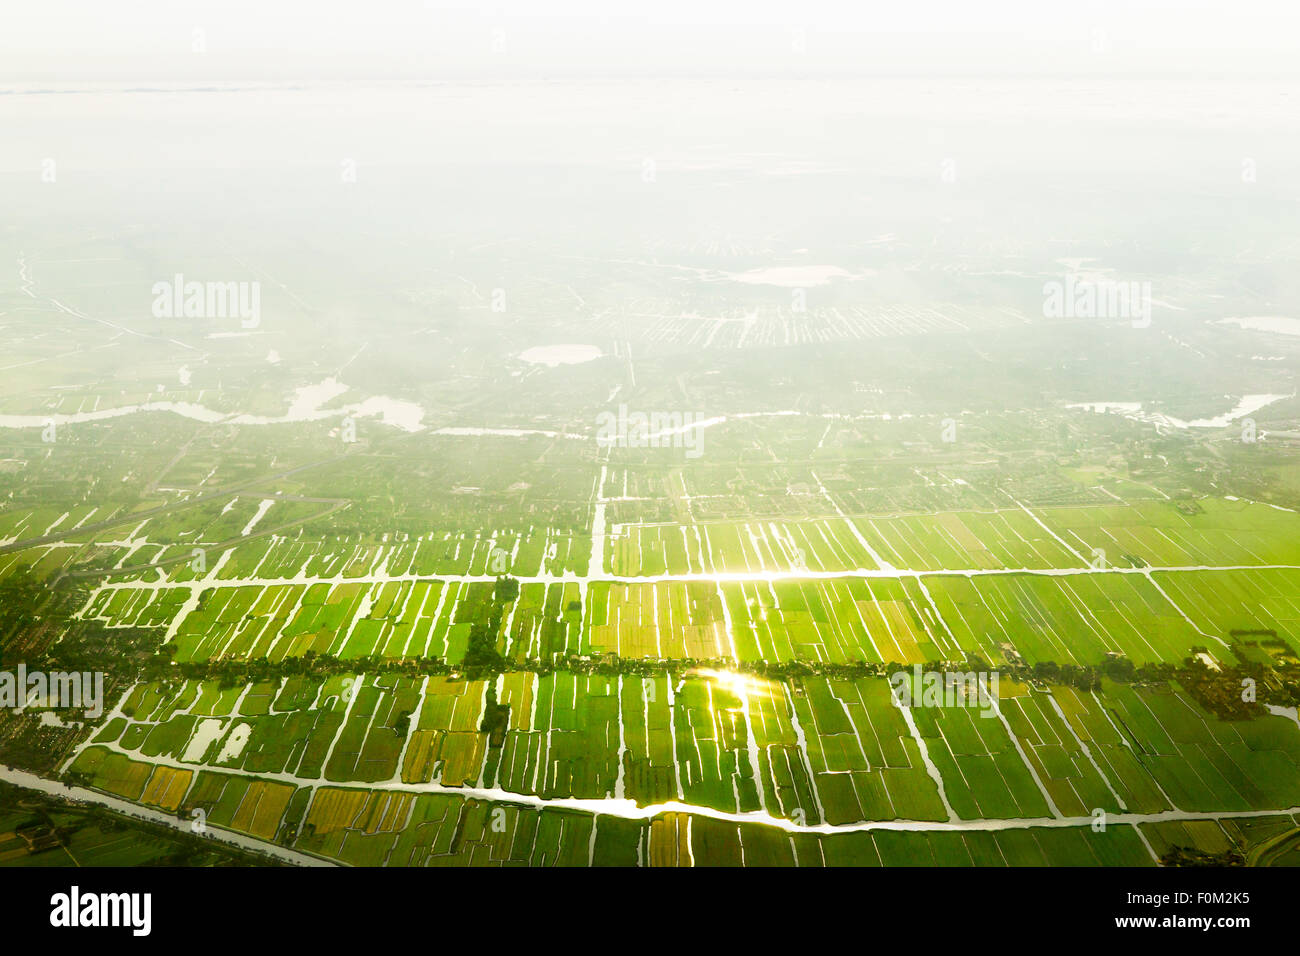 Aerial view of fields and canals in the backlight, Holland, Netherlands Stock Photo